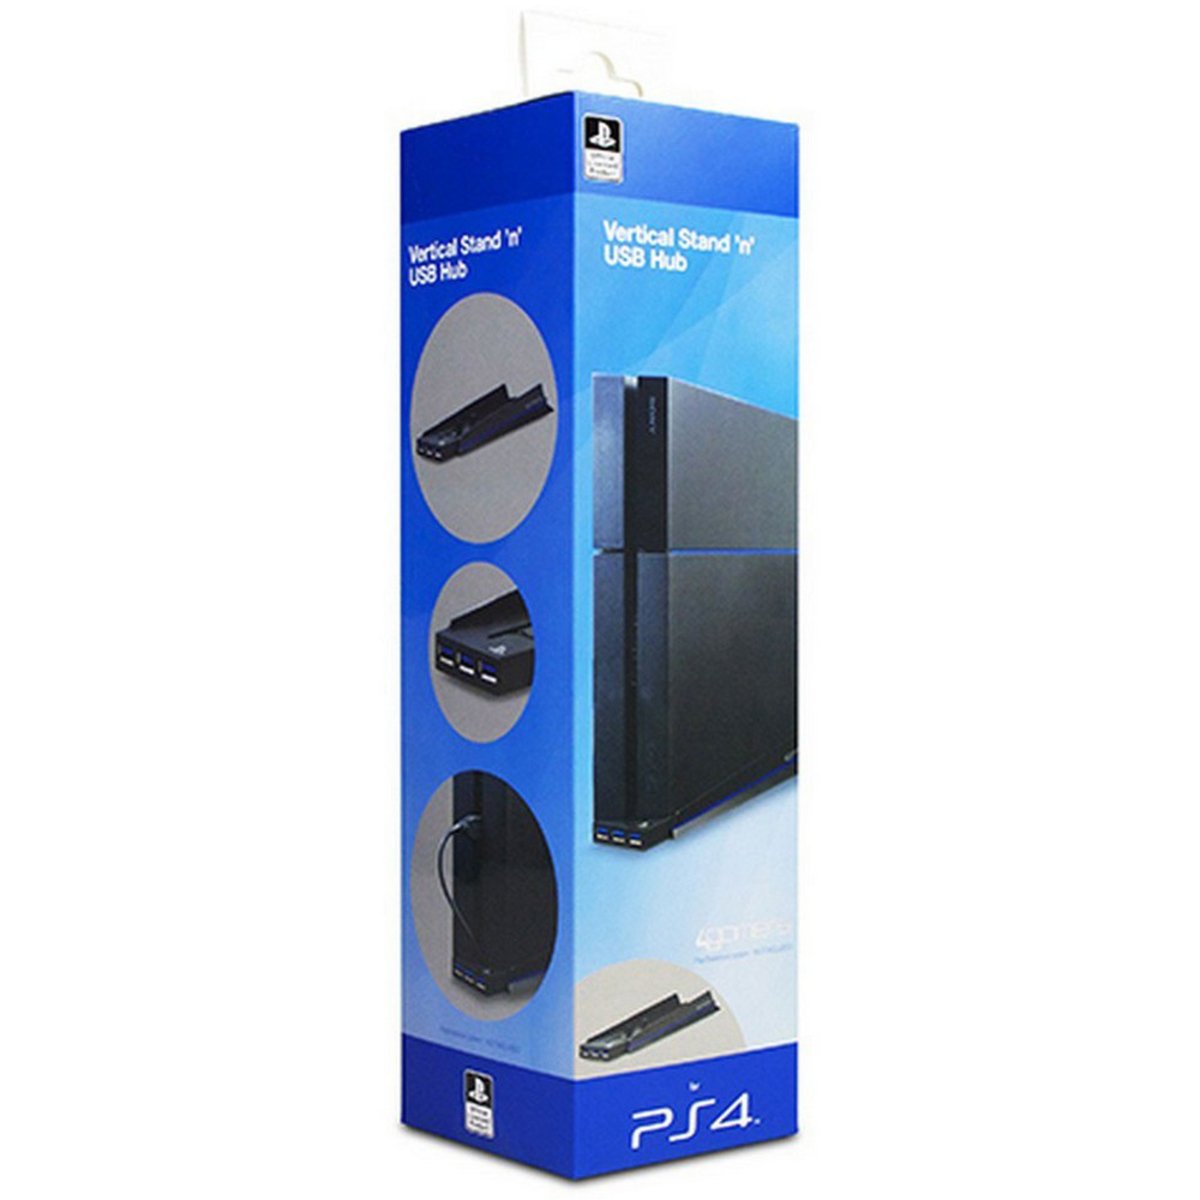 4Gamers PS4 Vertical Stand & USB Hub 4G-4181